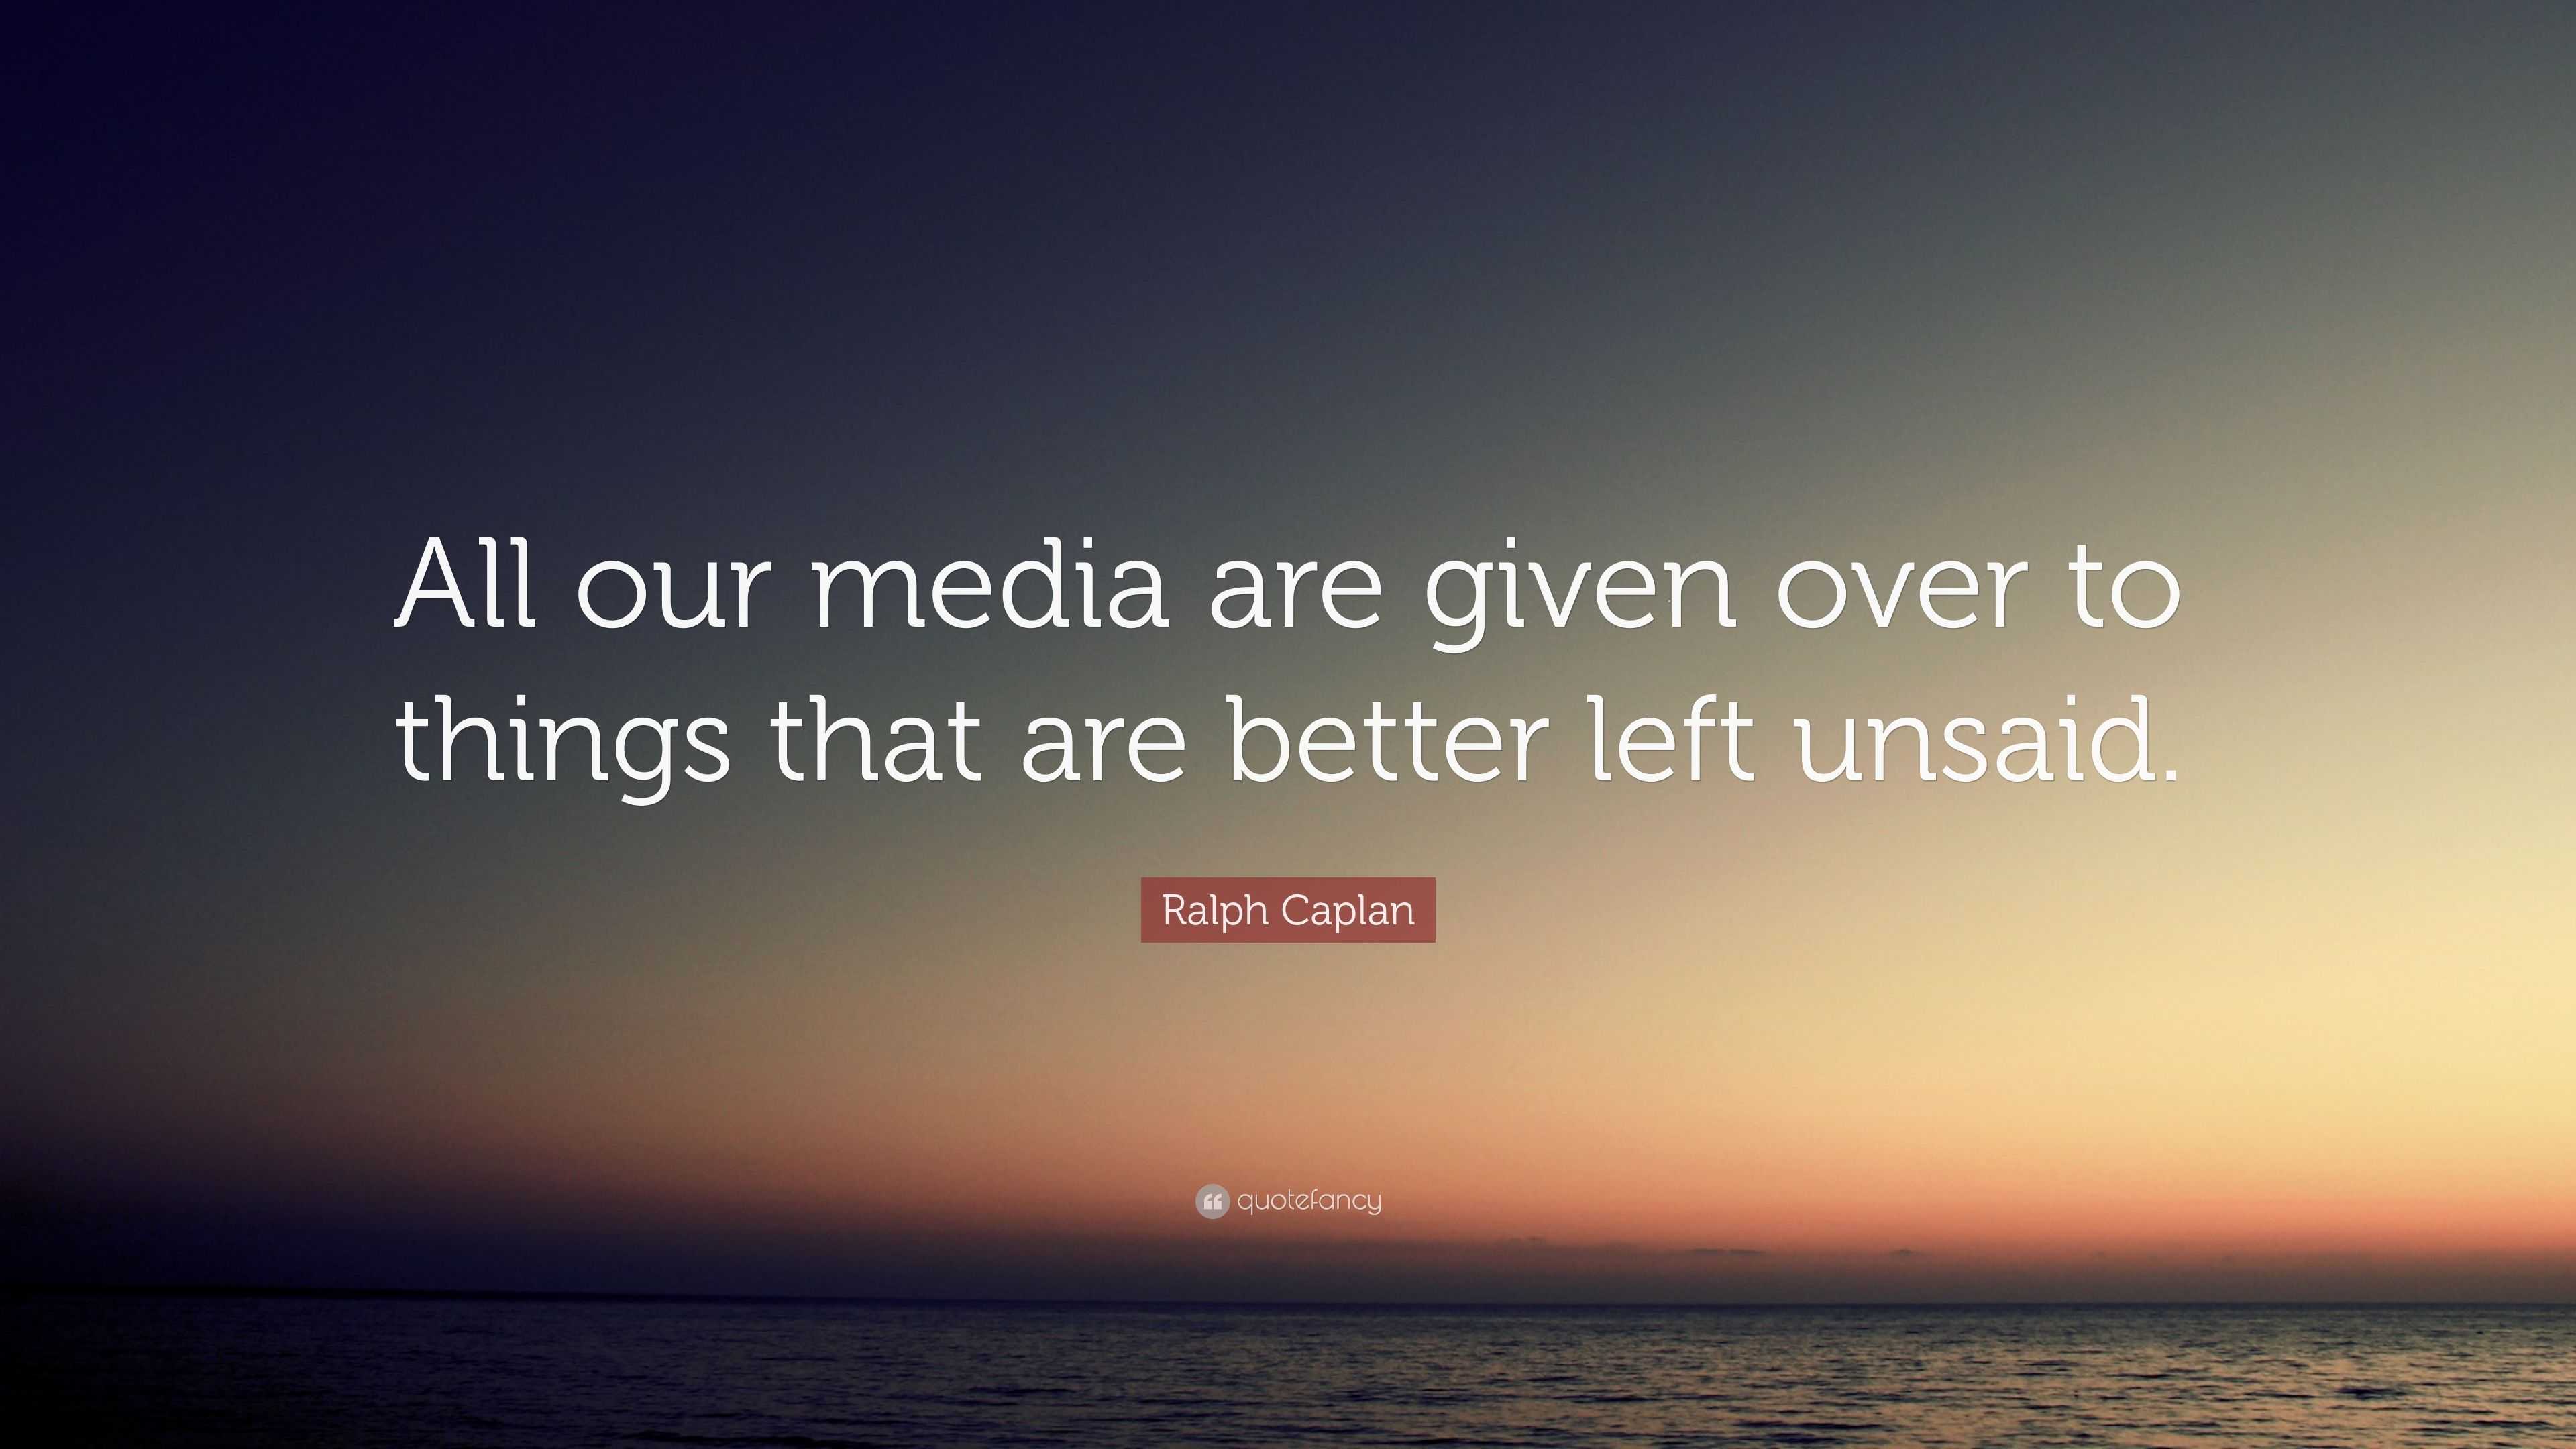 Ralph Caplan Quote: “All our media are given over to things that are ...